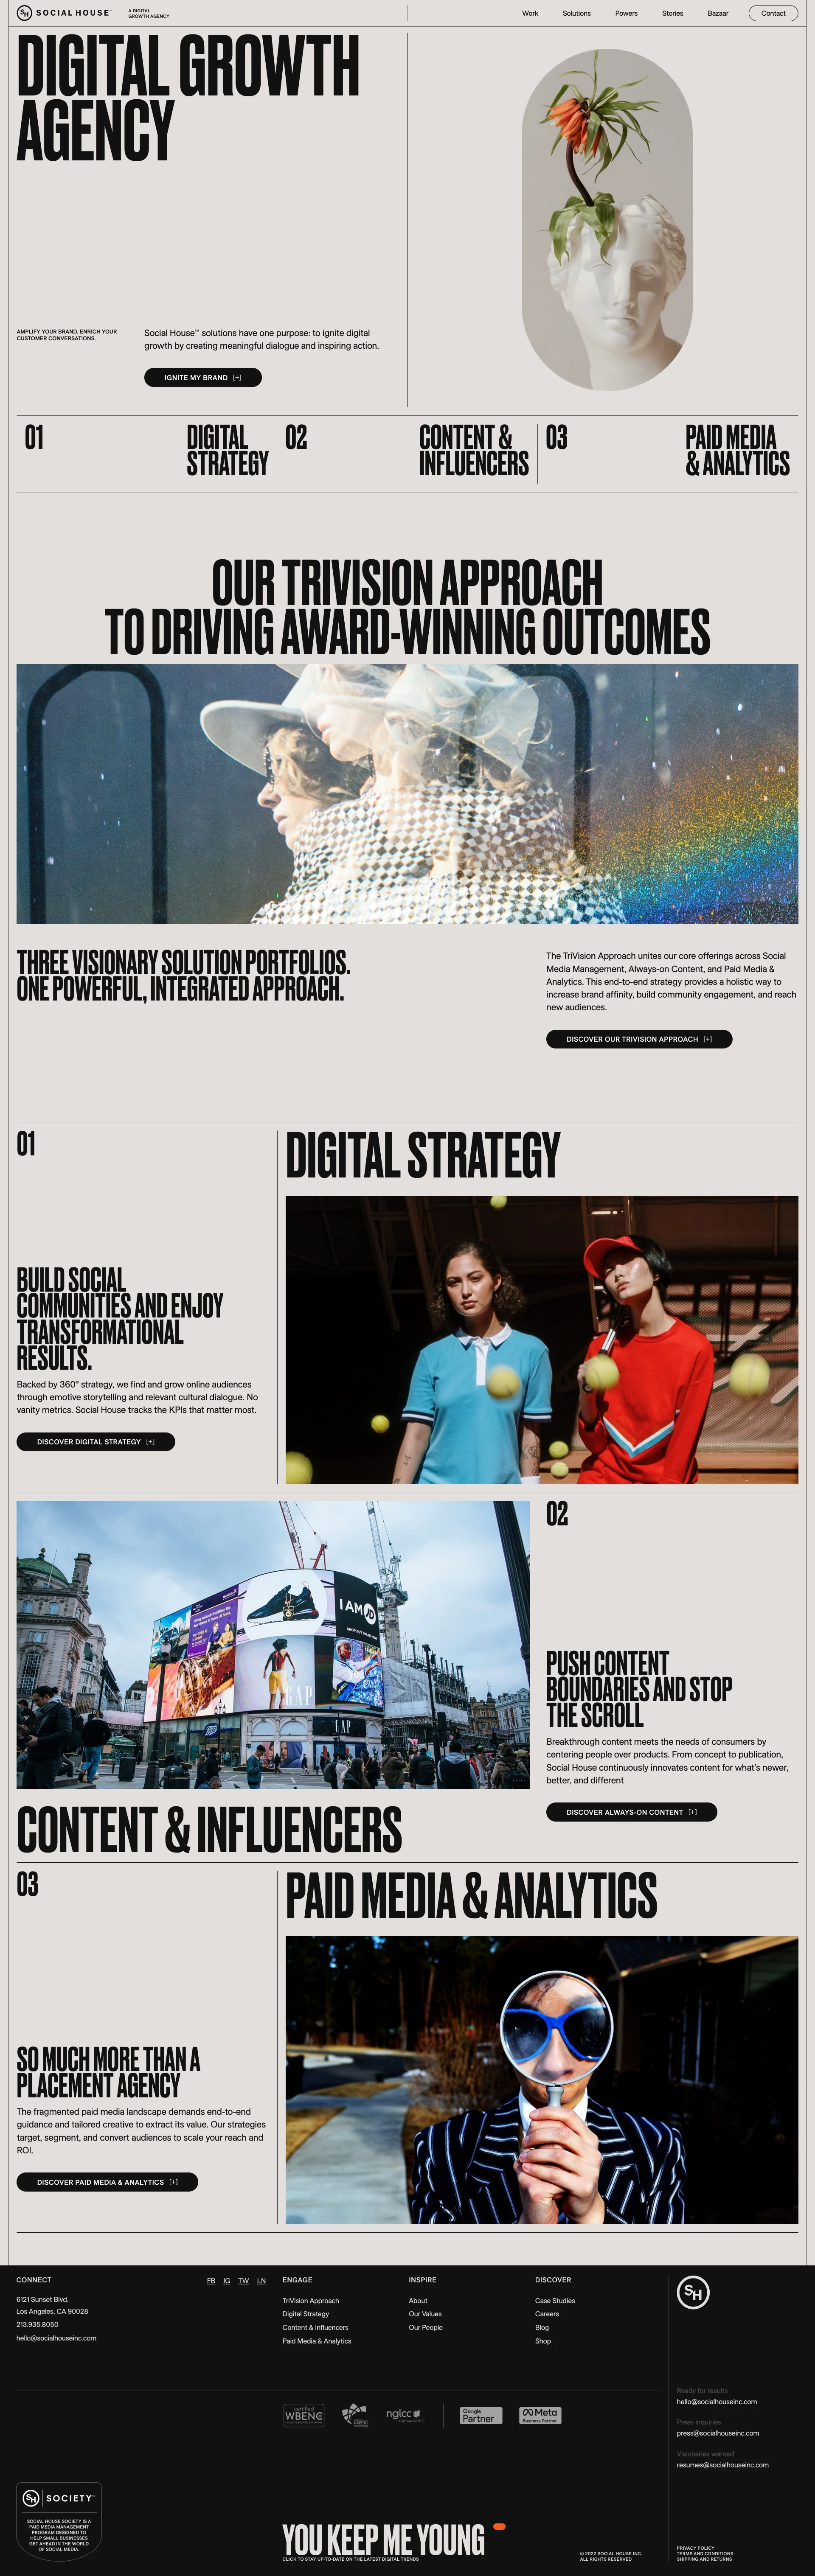 Social House Landing Page Example: Social House is an award-winning digital growth agency that enriches conversations between brands and their audiences. Fuel your growth through visionary storytelling.